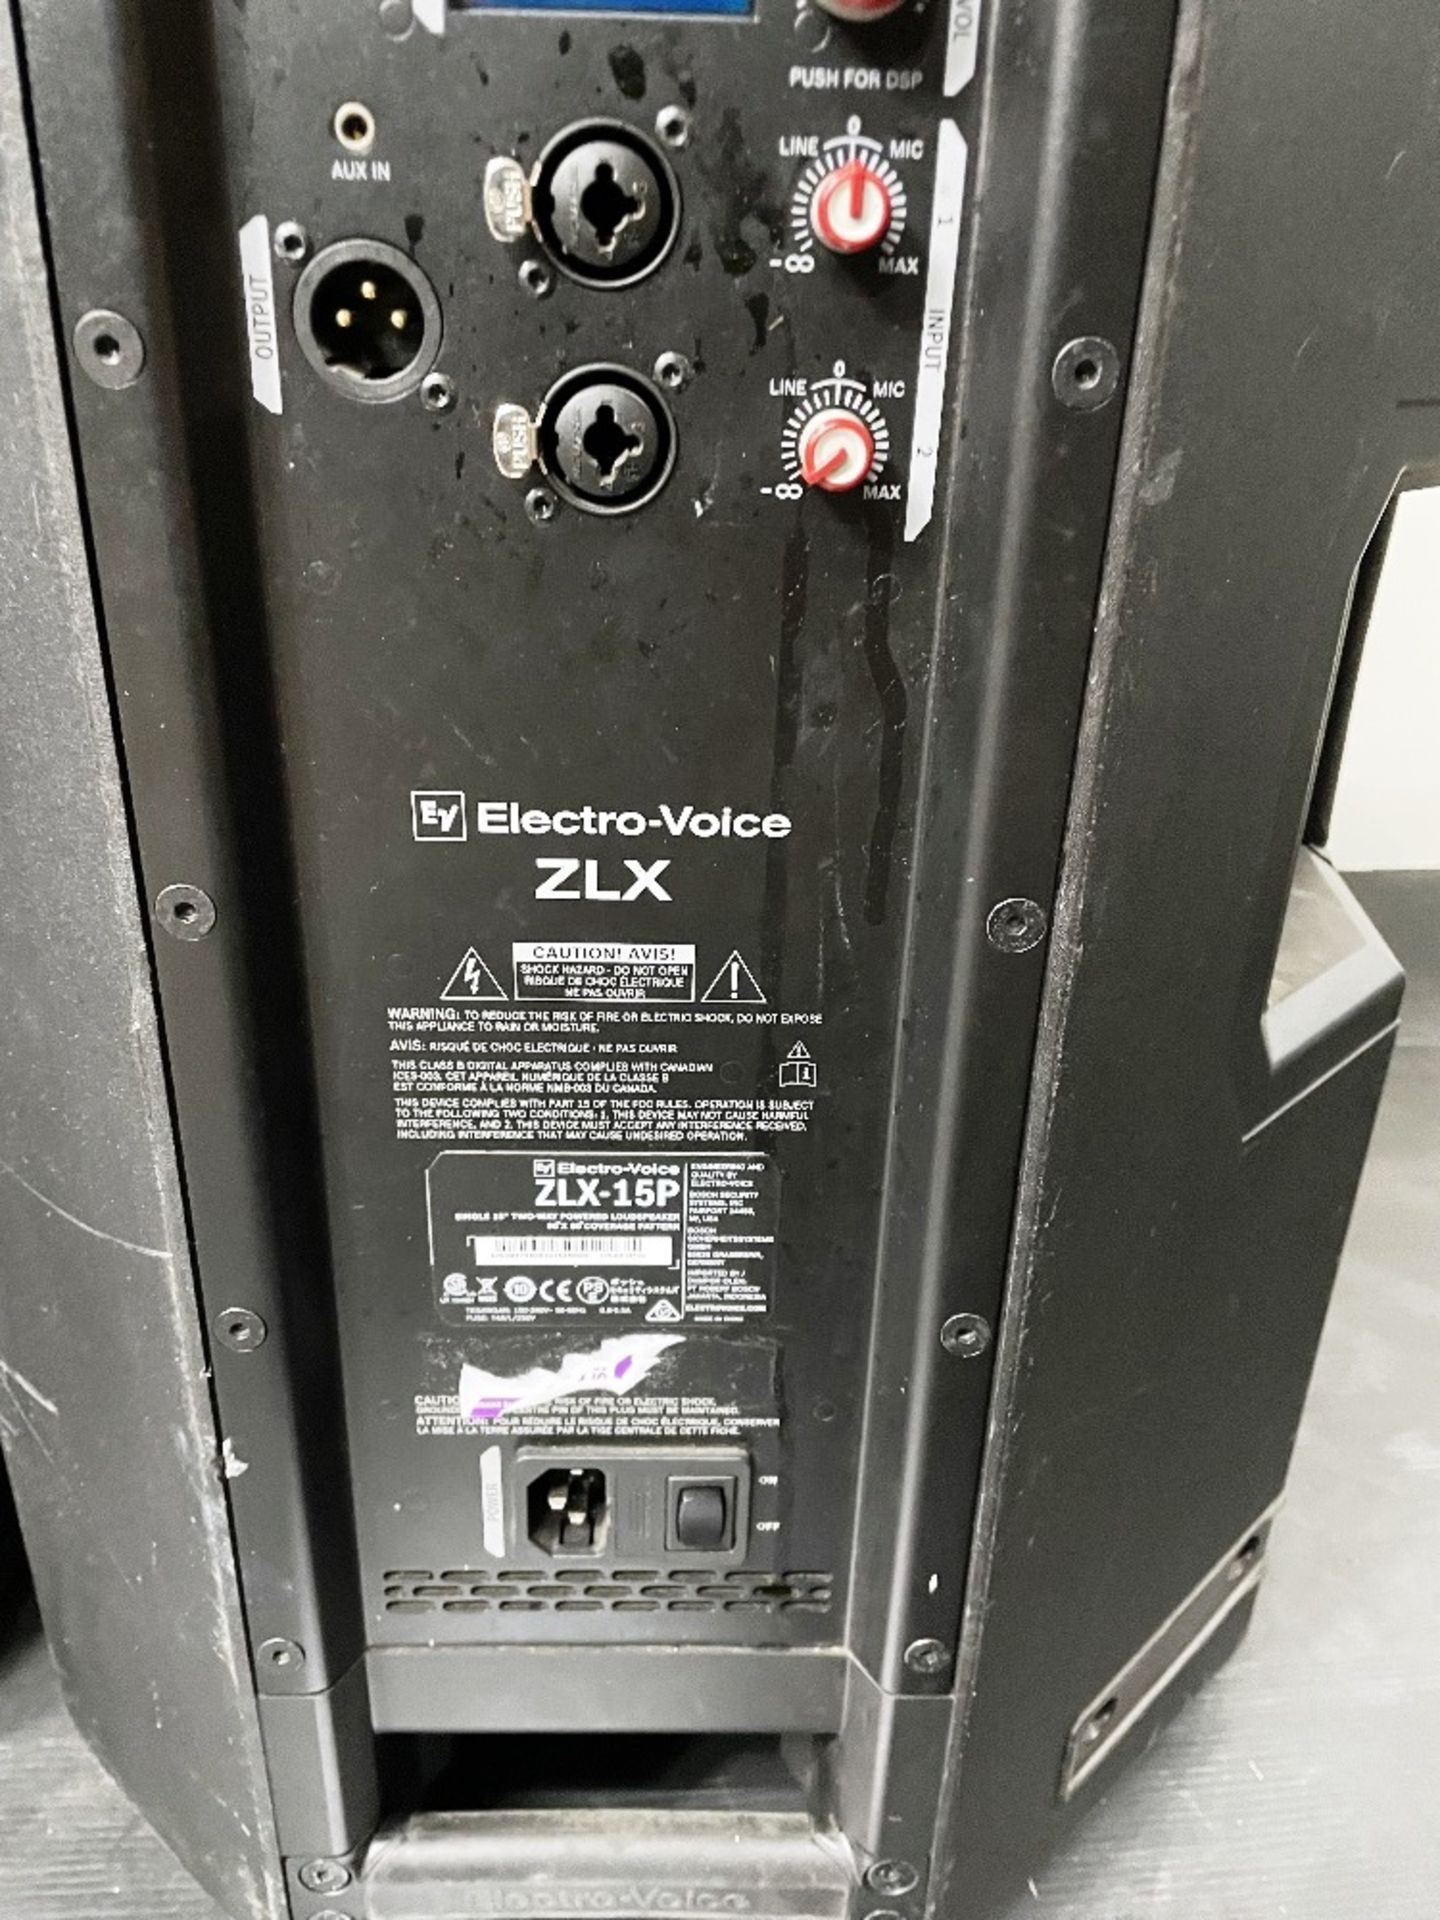 2 x Electro-Voice ZLX-15P Powered PA Loudspeakers w/ Protective Covers - Image 4 of 6